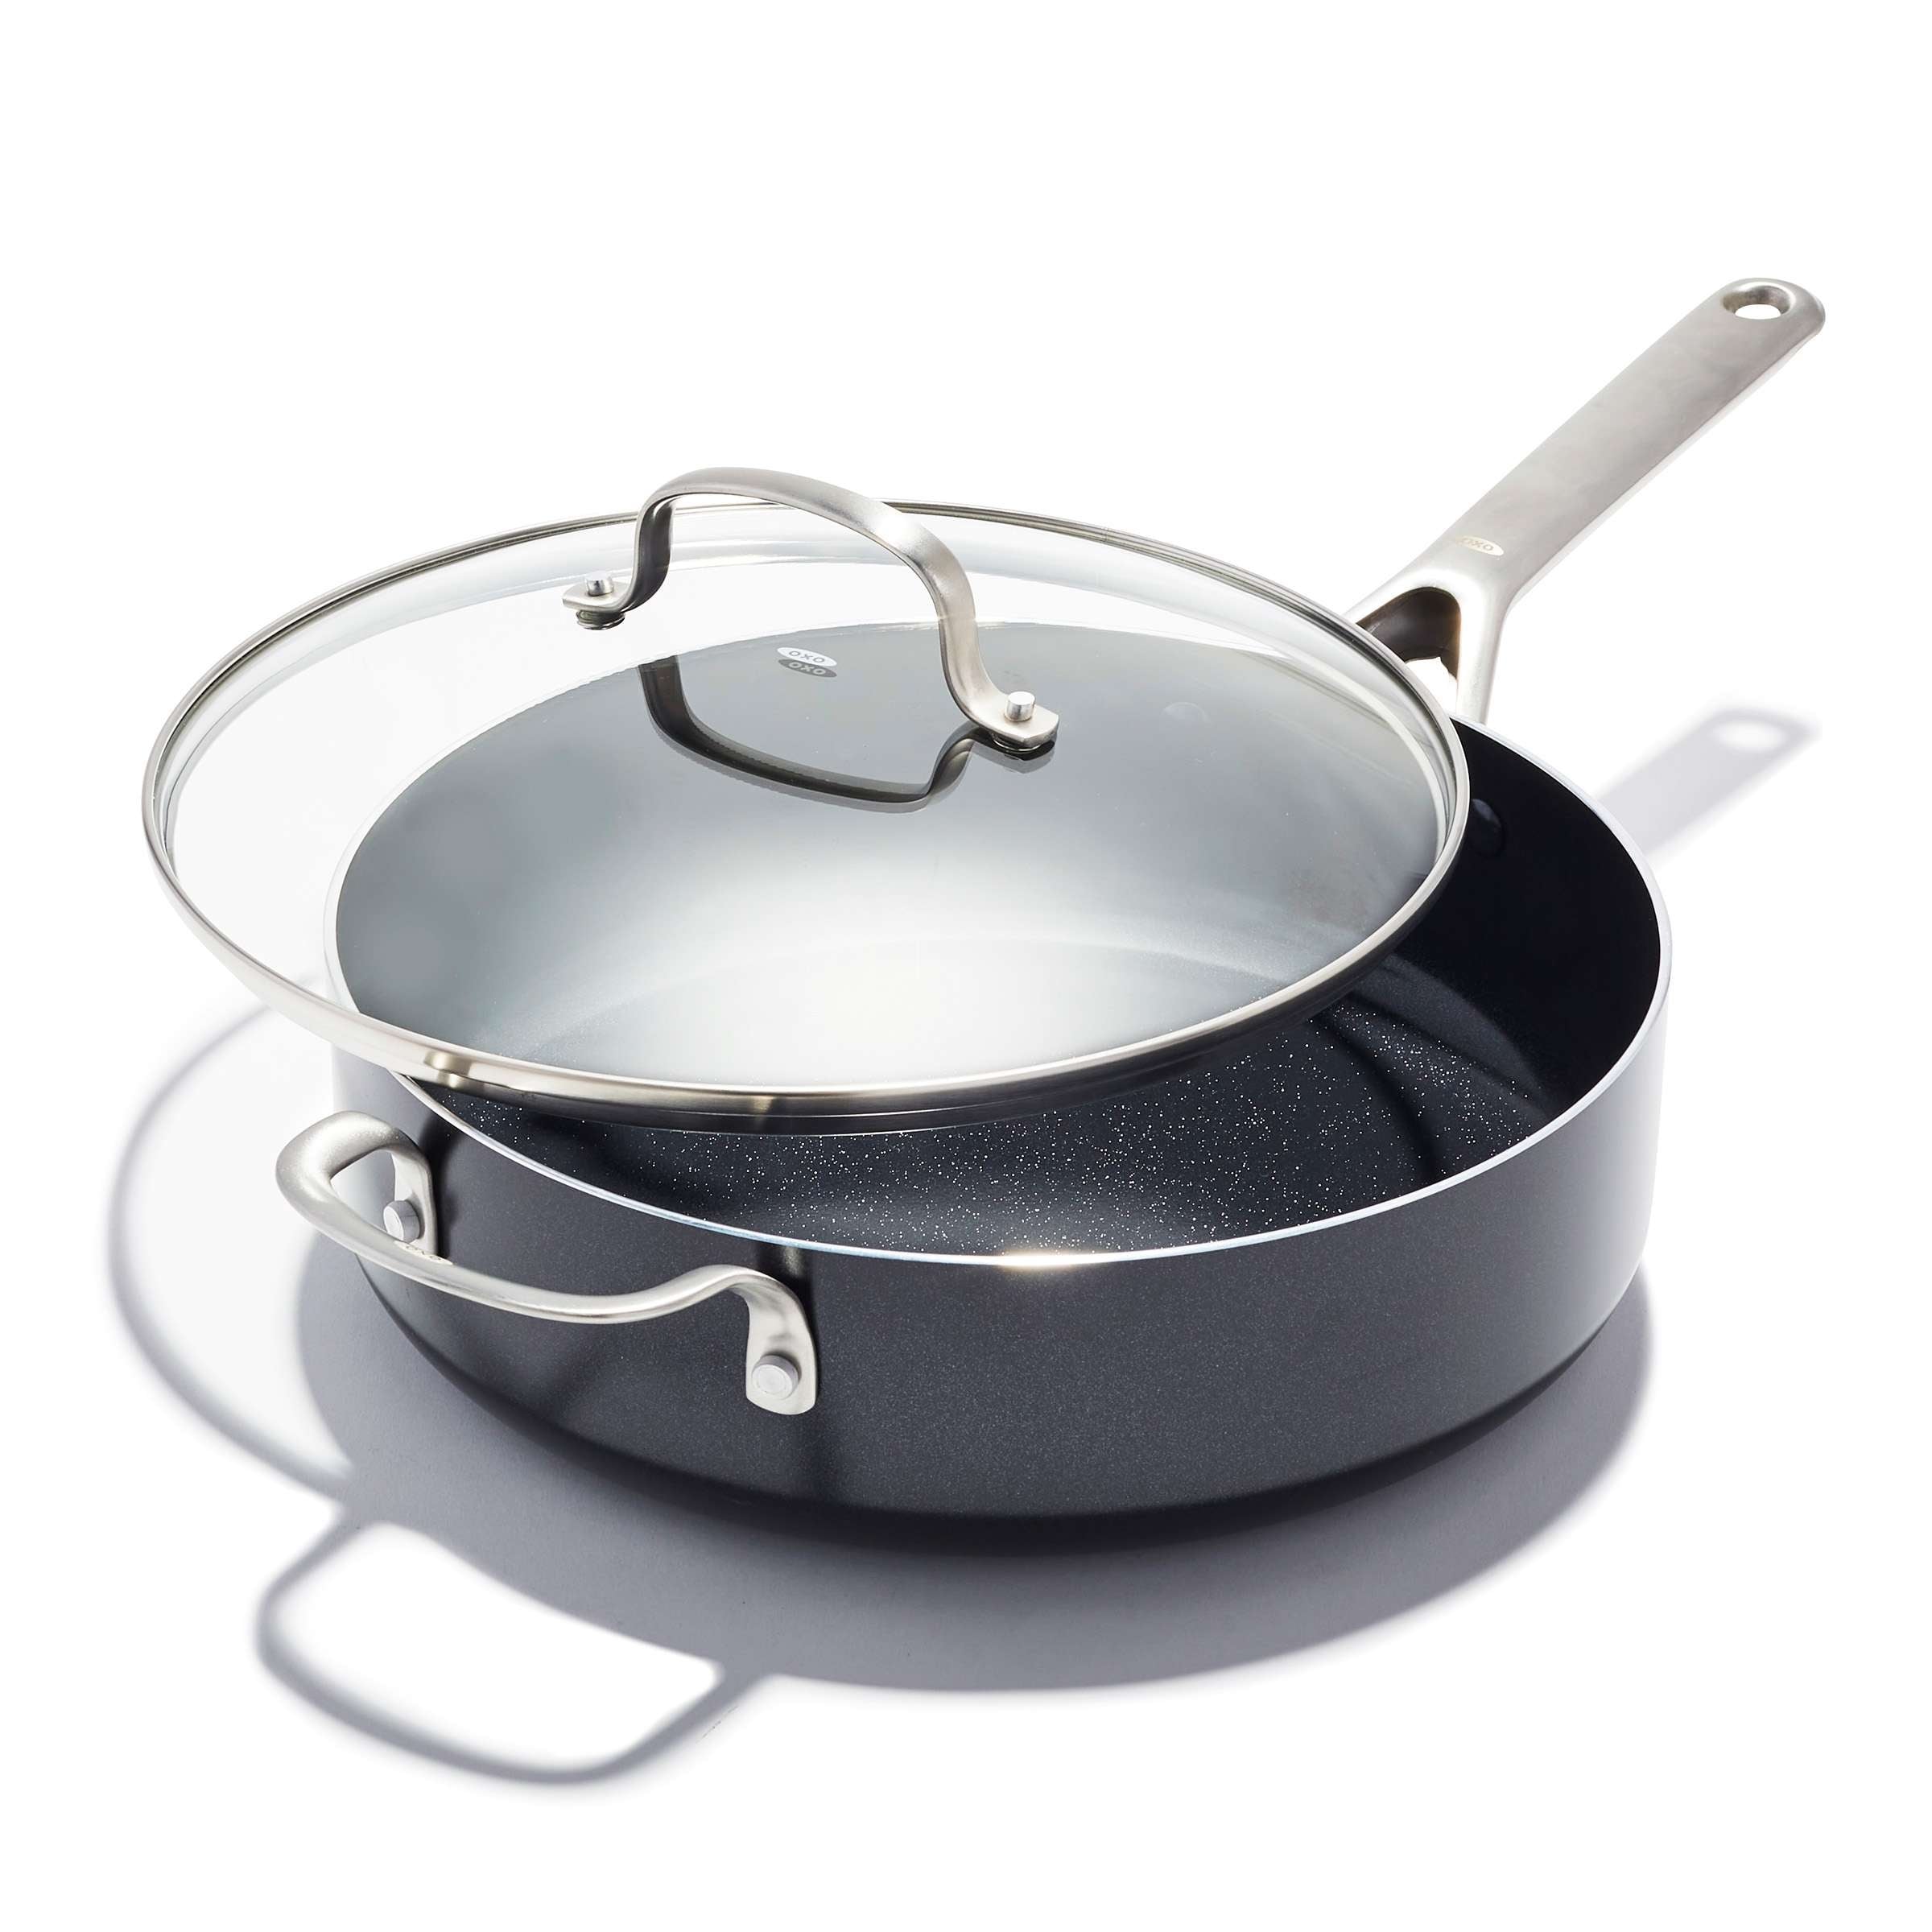 https://ak1.ostkcdn.com/images/products/is/images/direct/471a99968732c3e187a337e40798e8d923543b42/OXO-Agility-5Qt-Saute-Pan-with-Lid.jpg